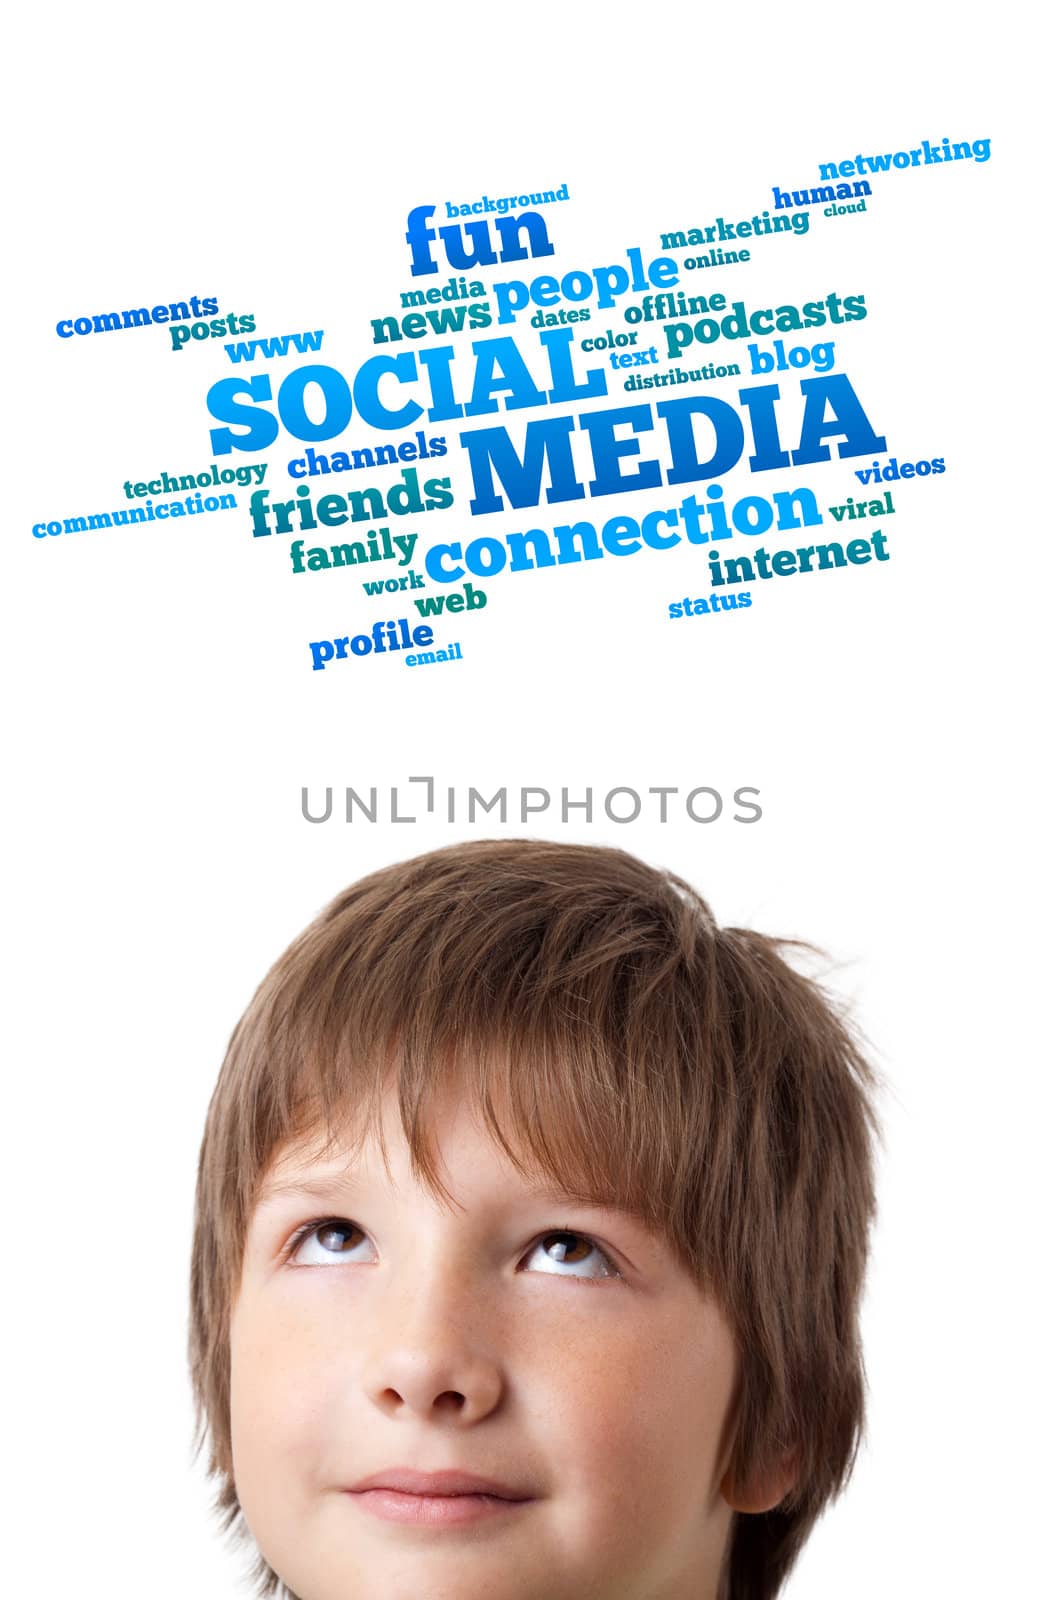 Young persons head looking with gesture at social type of icons and signs